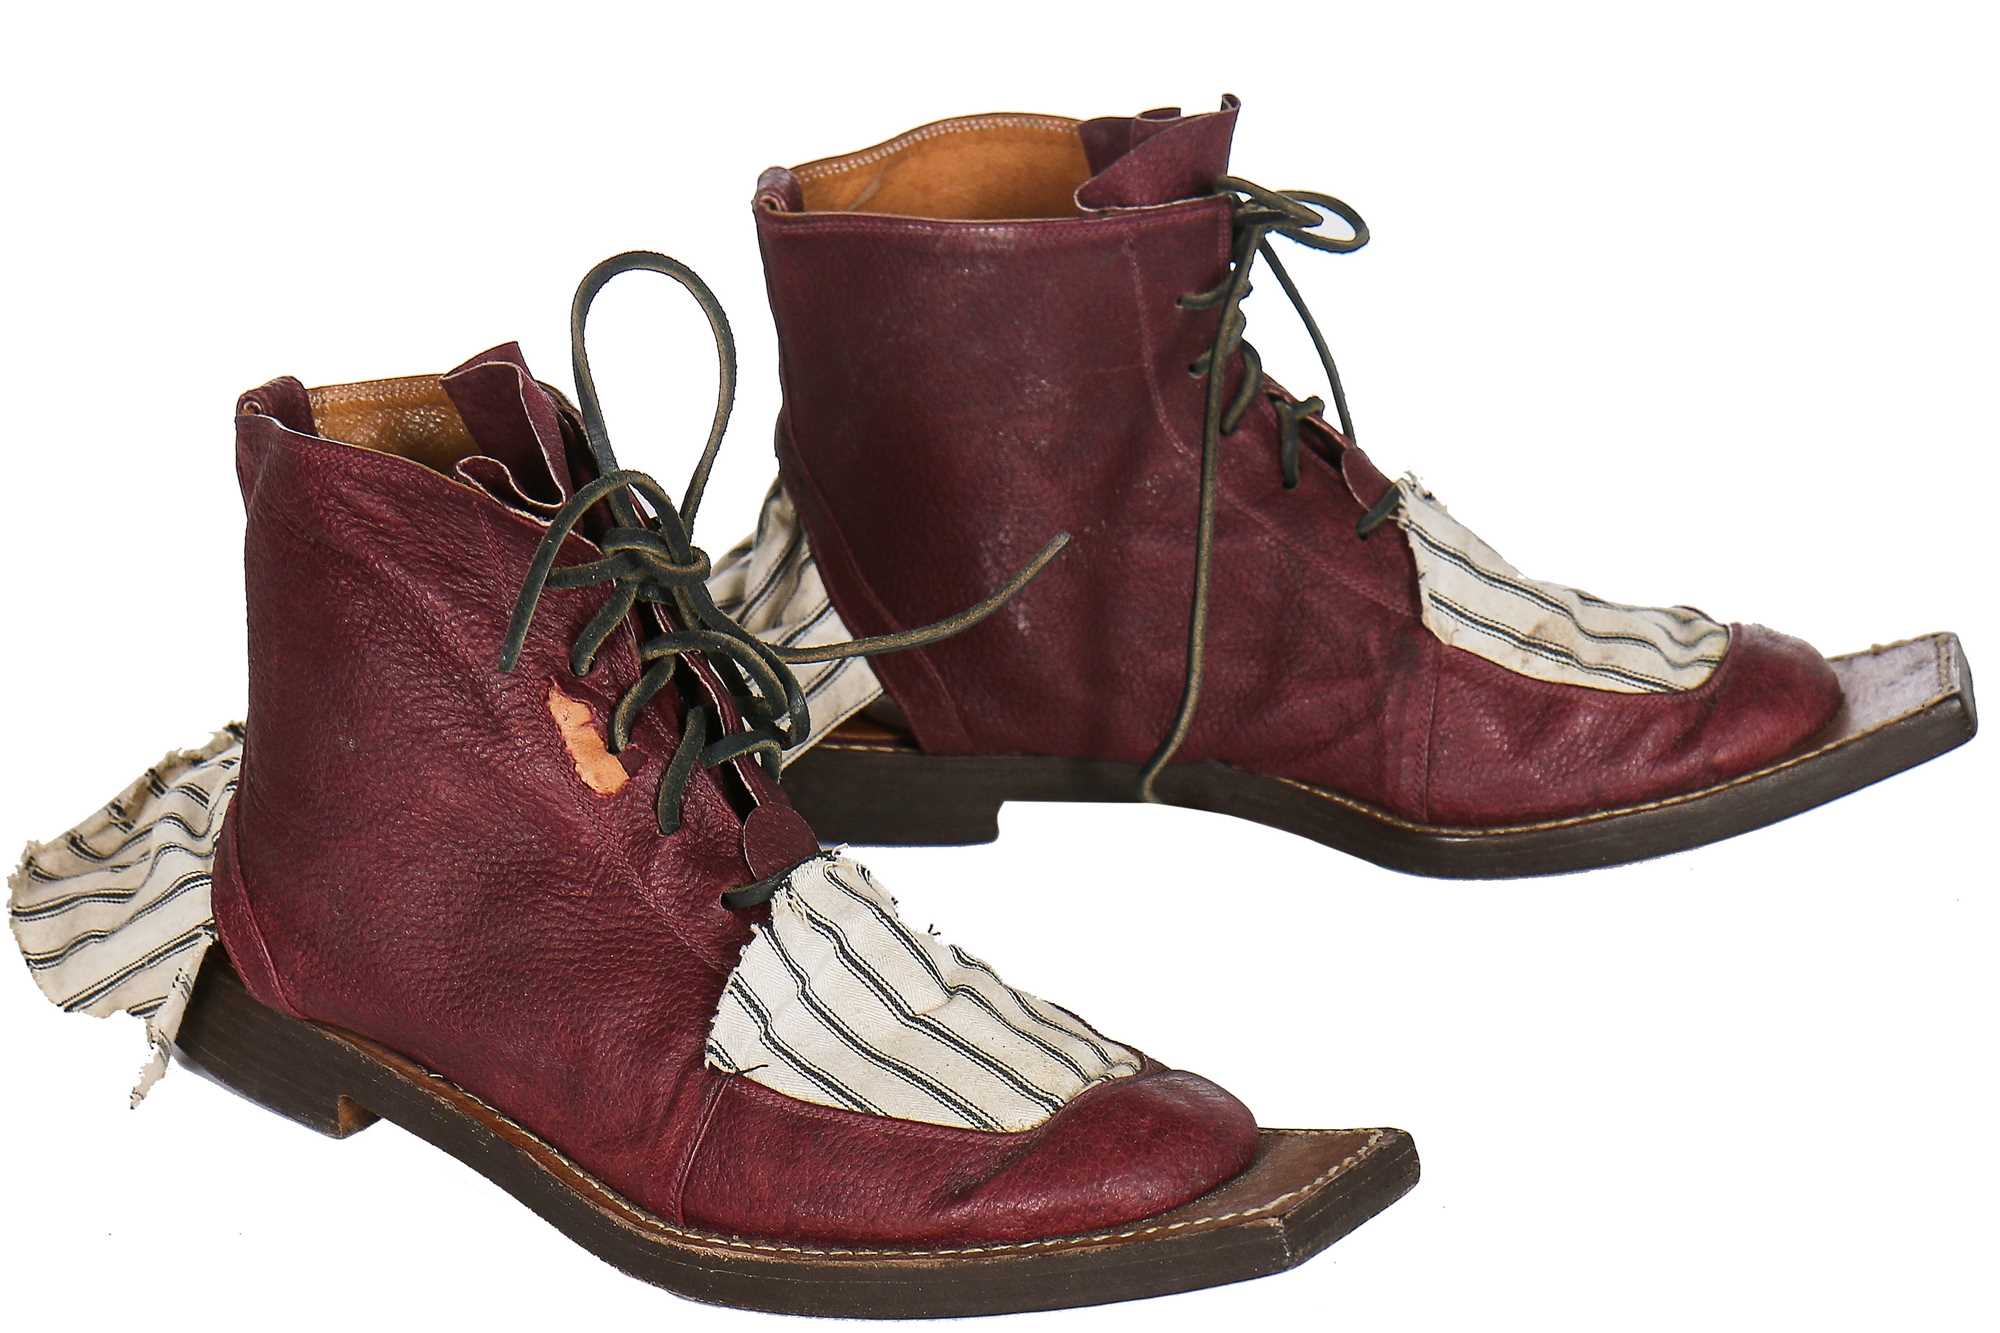 Lot 192 - A rare pair of Patrick Cox for John Galliano 'Hobo' boots, 'Fallen Angels' collection, Spring-Summer 1986